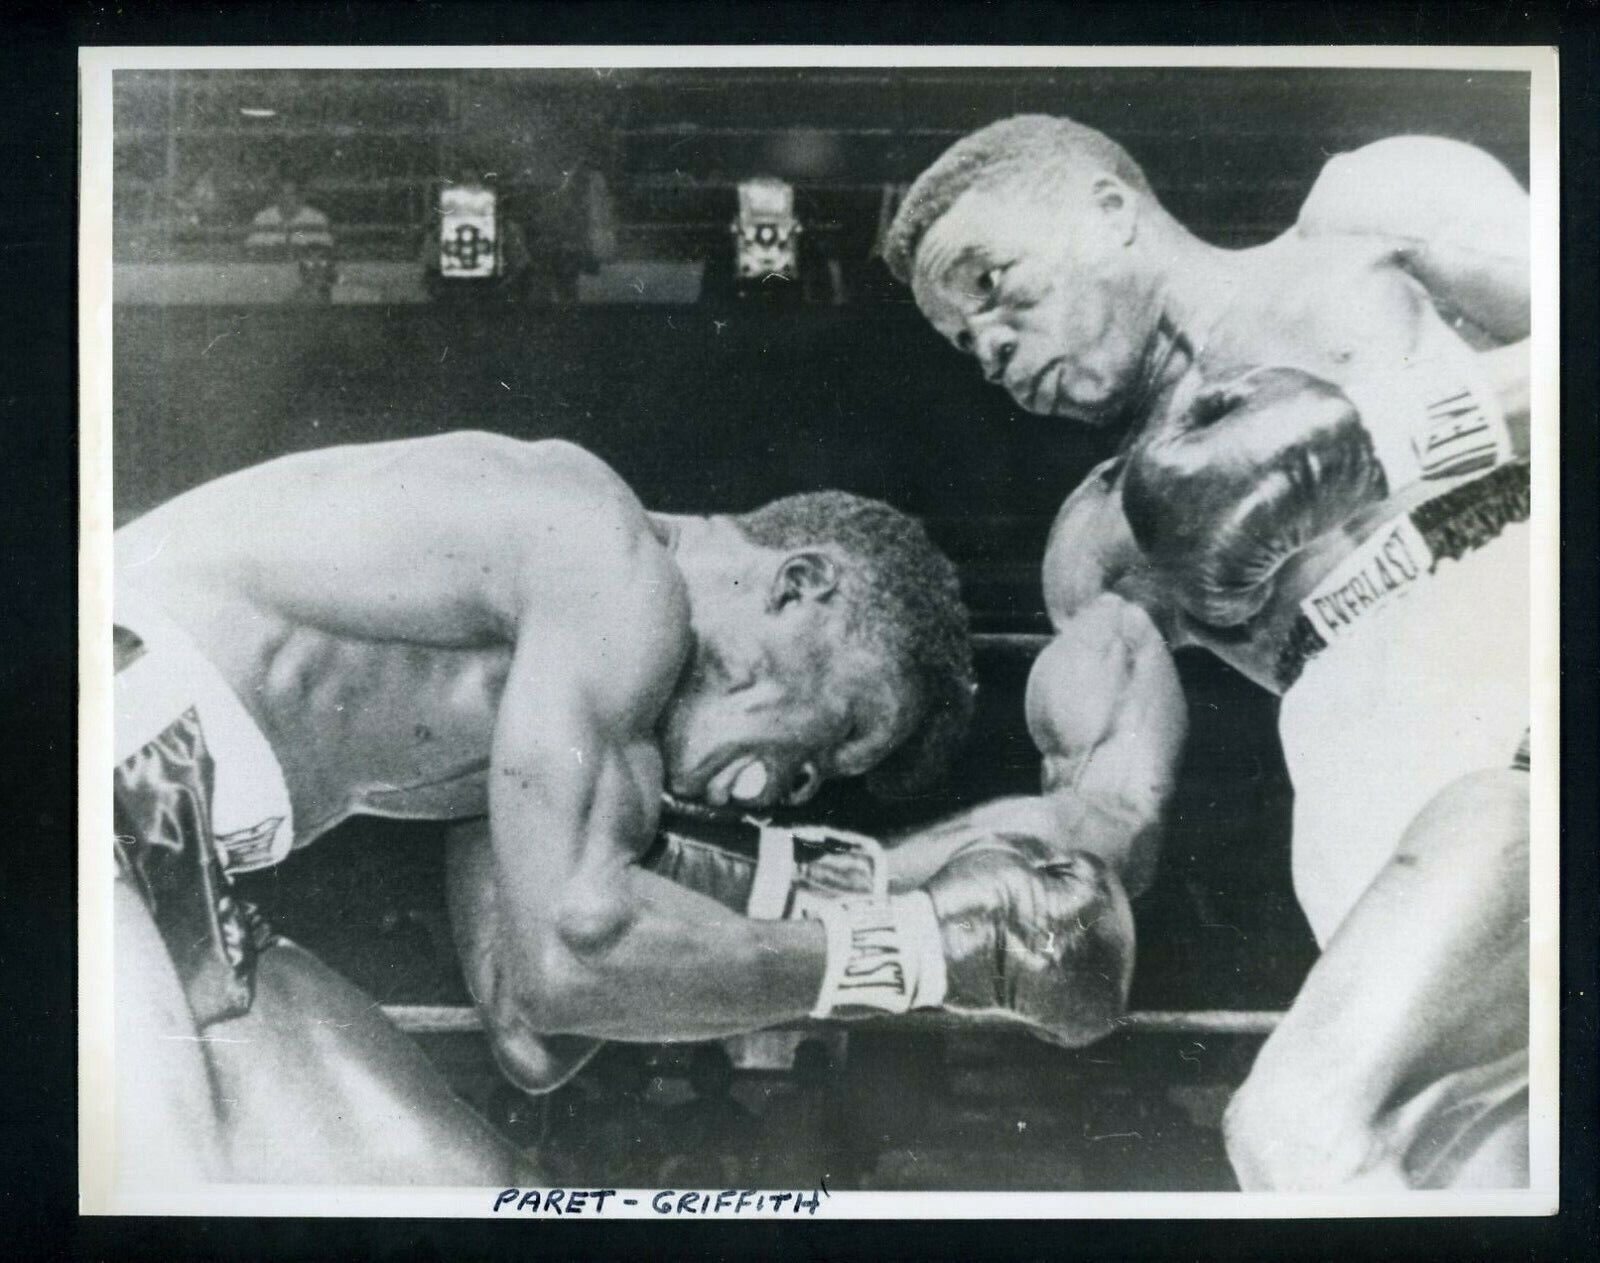 Emile Griffith & Benny Paret 1962 Welterweight Title Fight Press Photo Poster painting Boxing